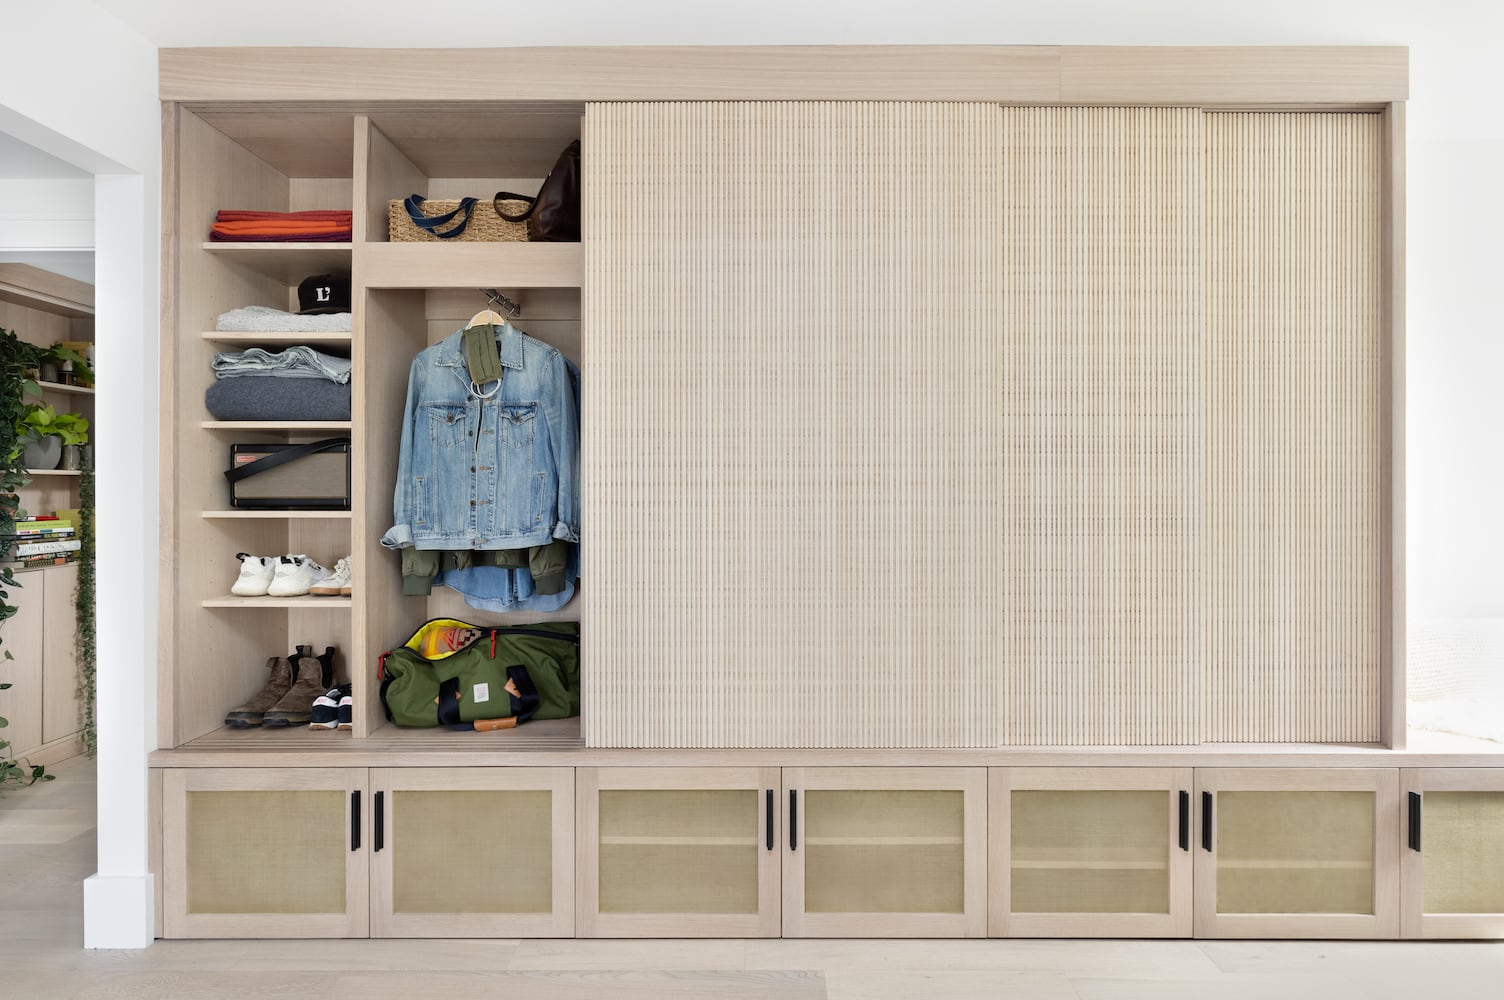 Custom casework housing clothing and linens behind textured bamboo sliding doors